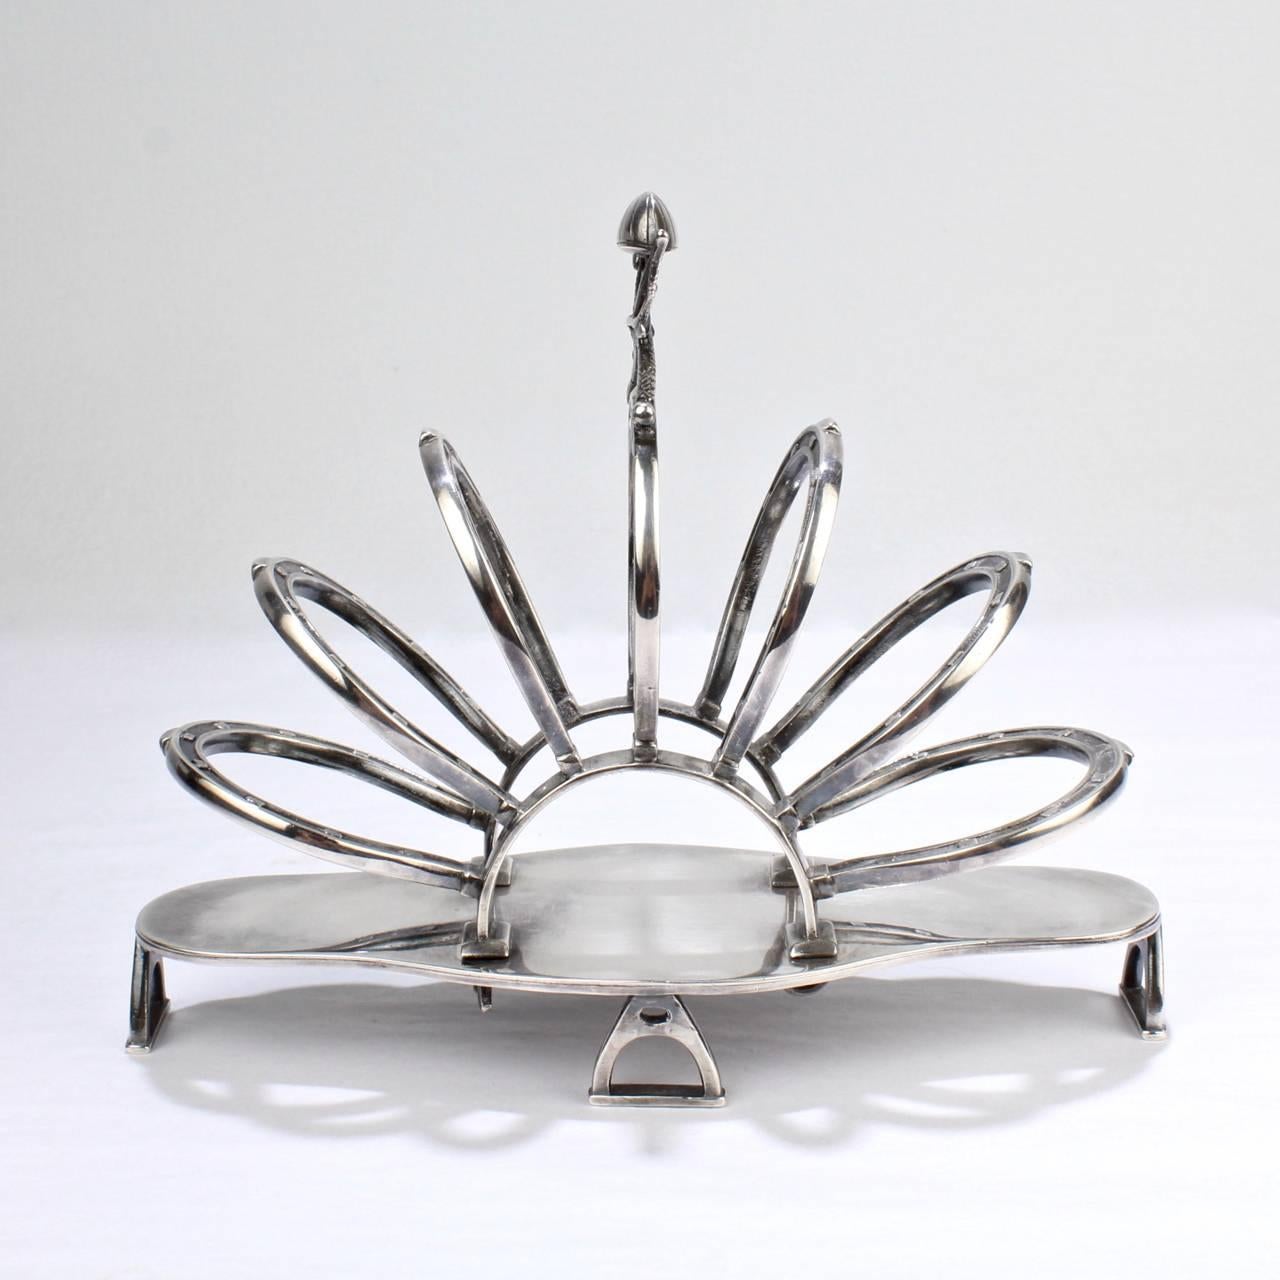 A very fine late Victorian figural English silver-plated toast rack.

The design of this striking toast rack has an Equestrian theme from top to bottom.
'Stirrup' feet support a tray with 'horseshoe' dividers, and the top bears a 'riding crop and